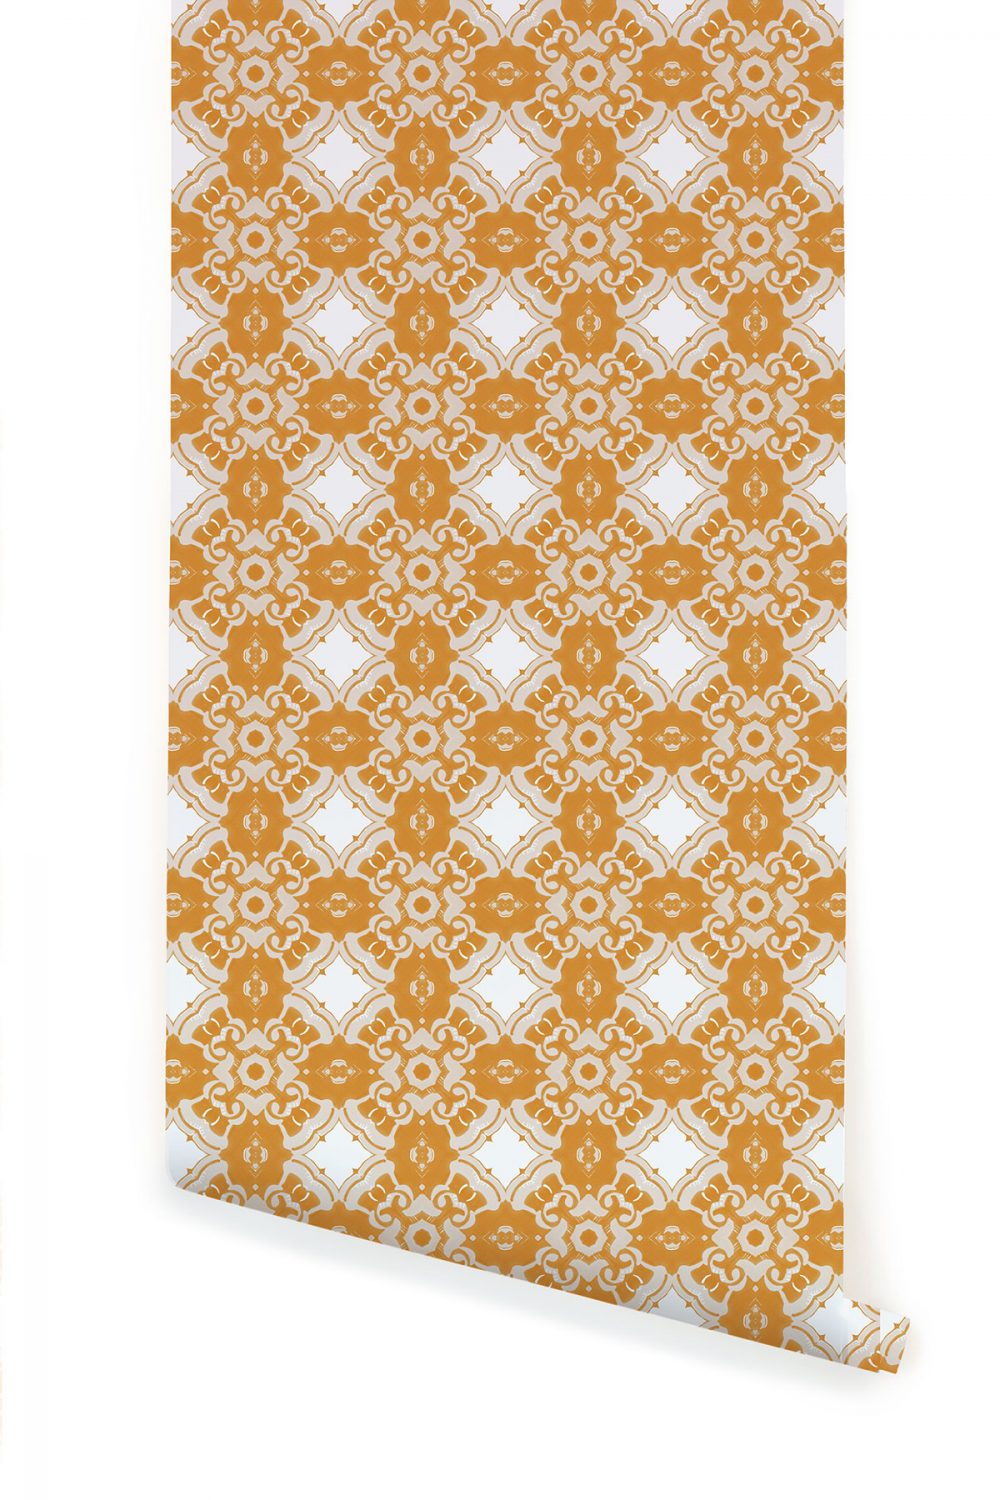 A roll of Pearl & Maude's Alexandria medallion prepasted wallpaper in daisy yellow, cream and white